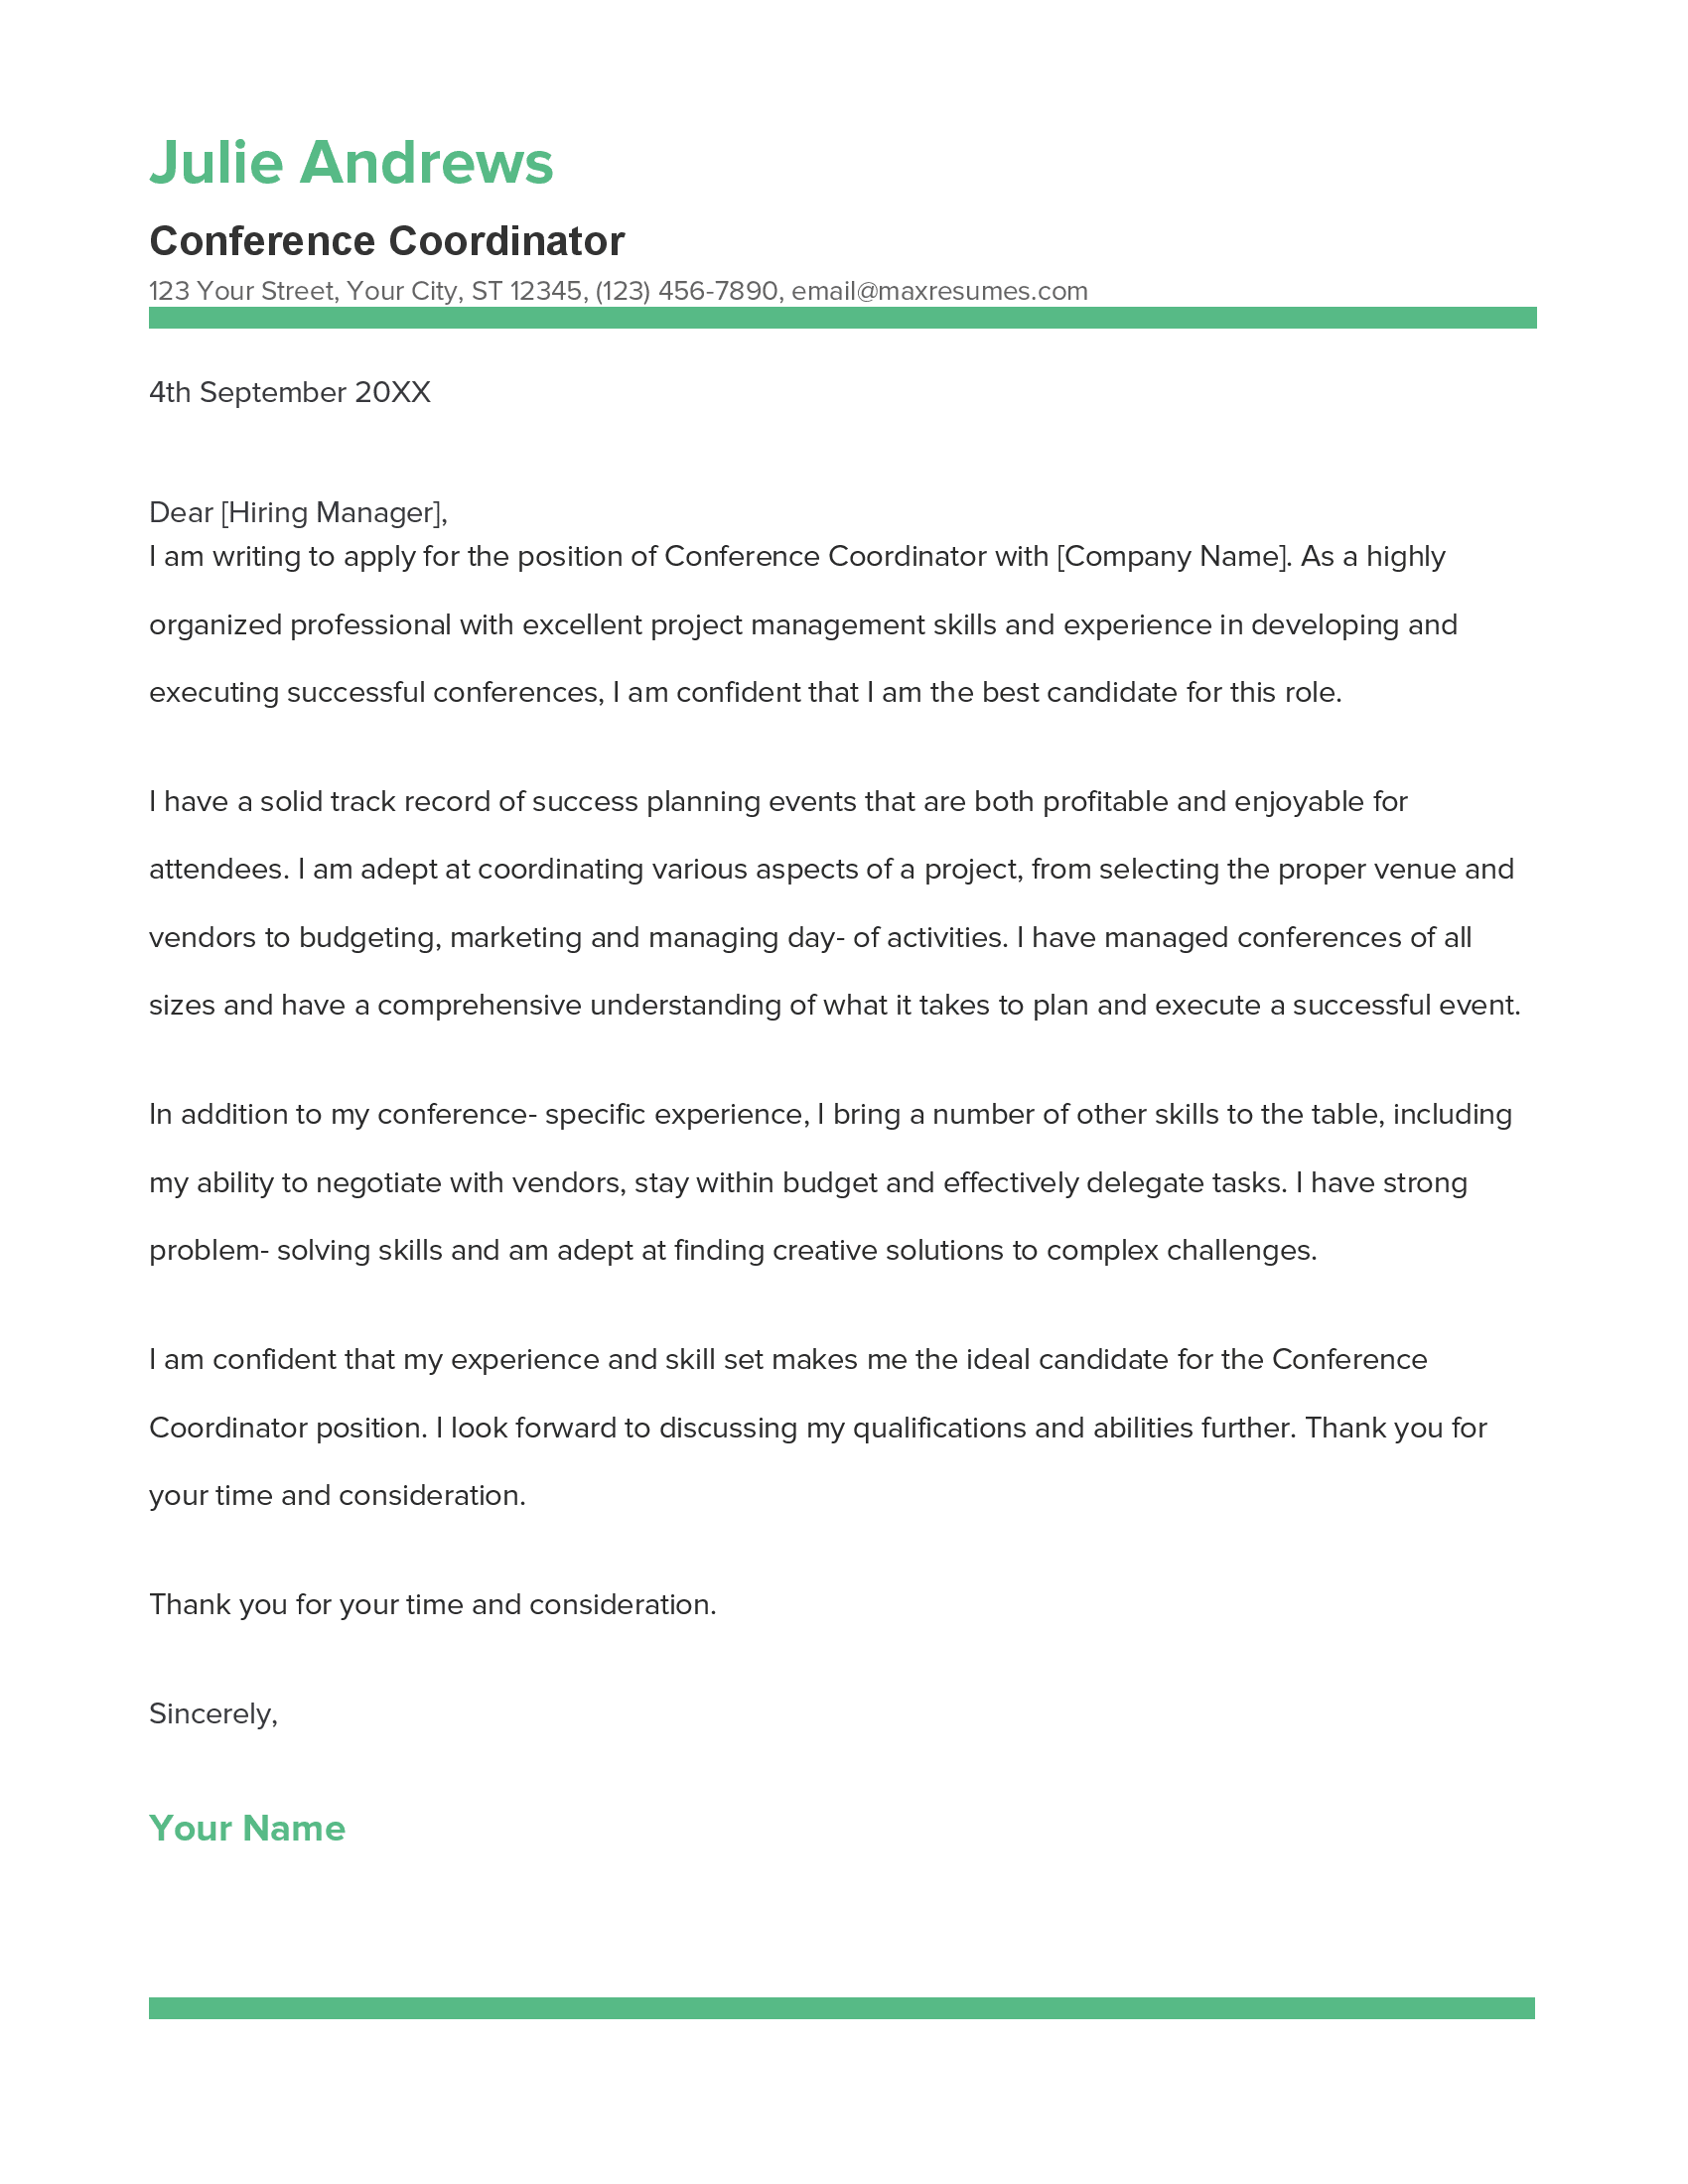 Conference Coordinator Cover Letter Example